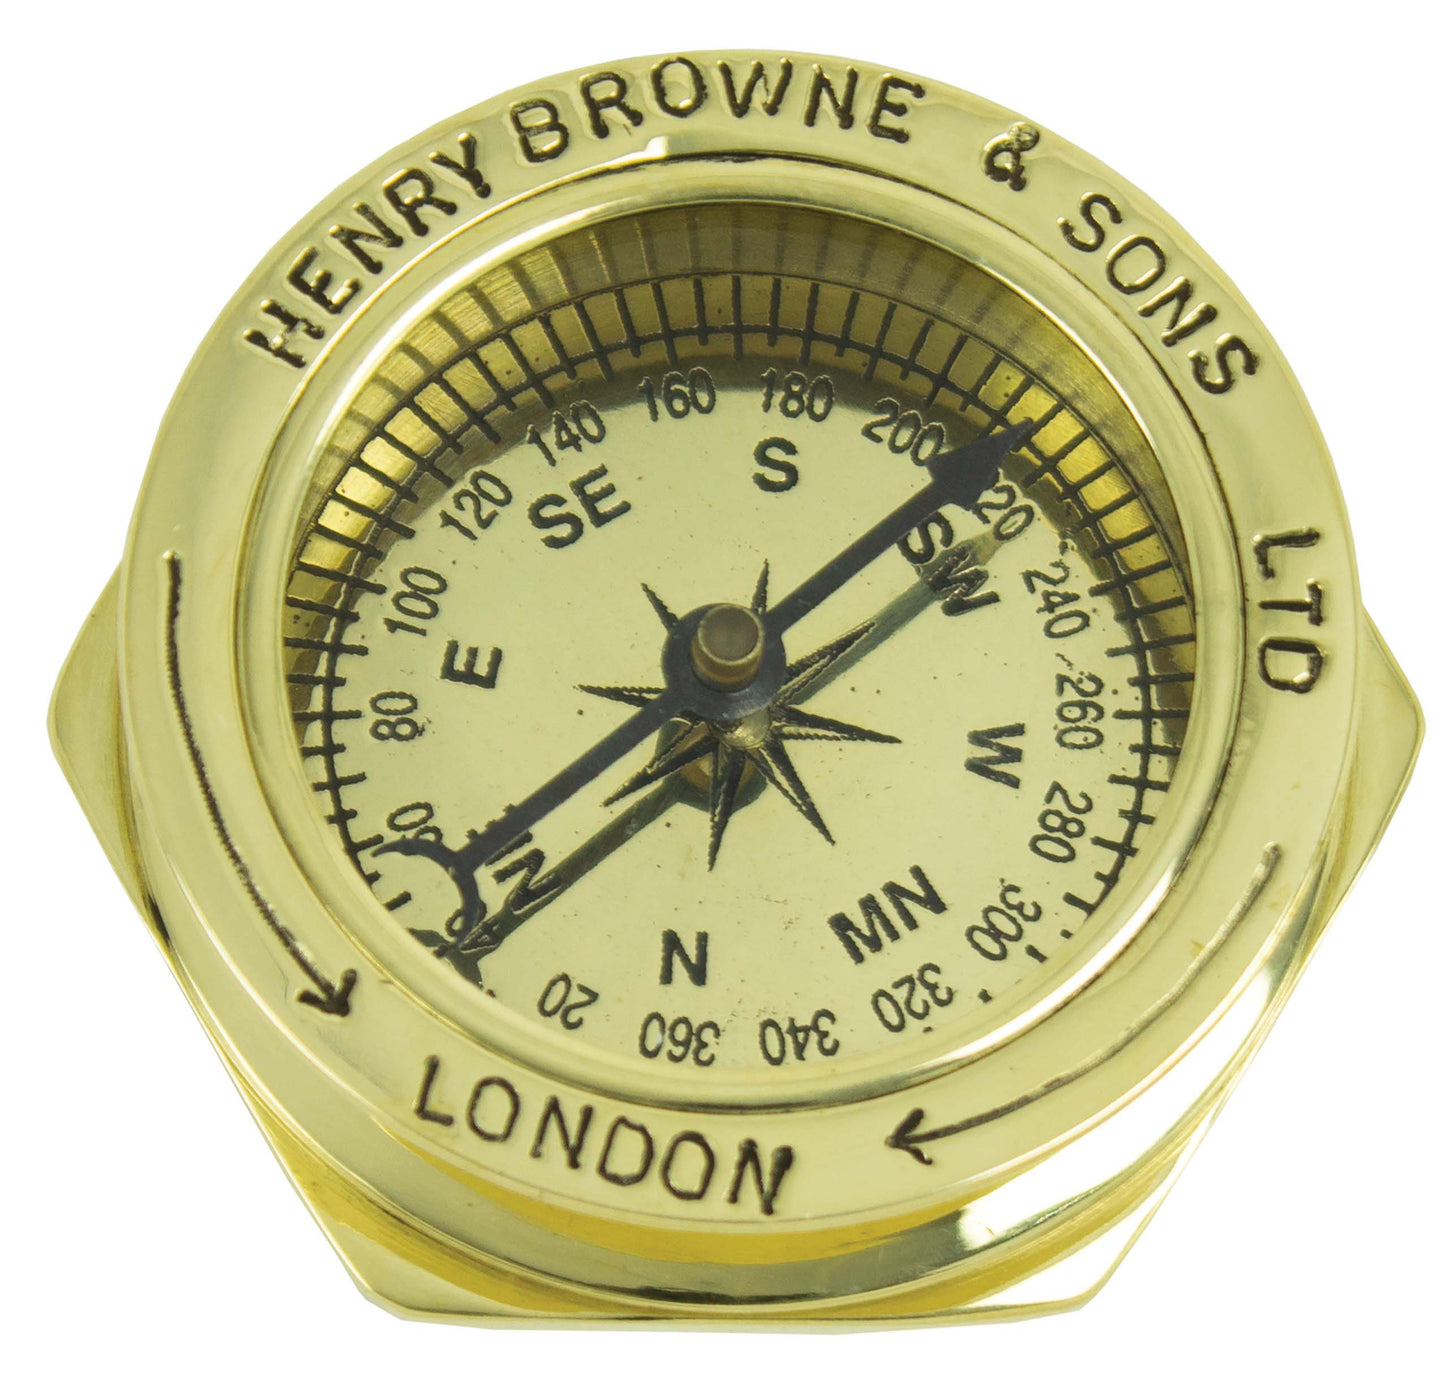 Compass - Henry Browne & Sons, London